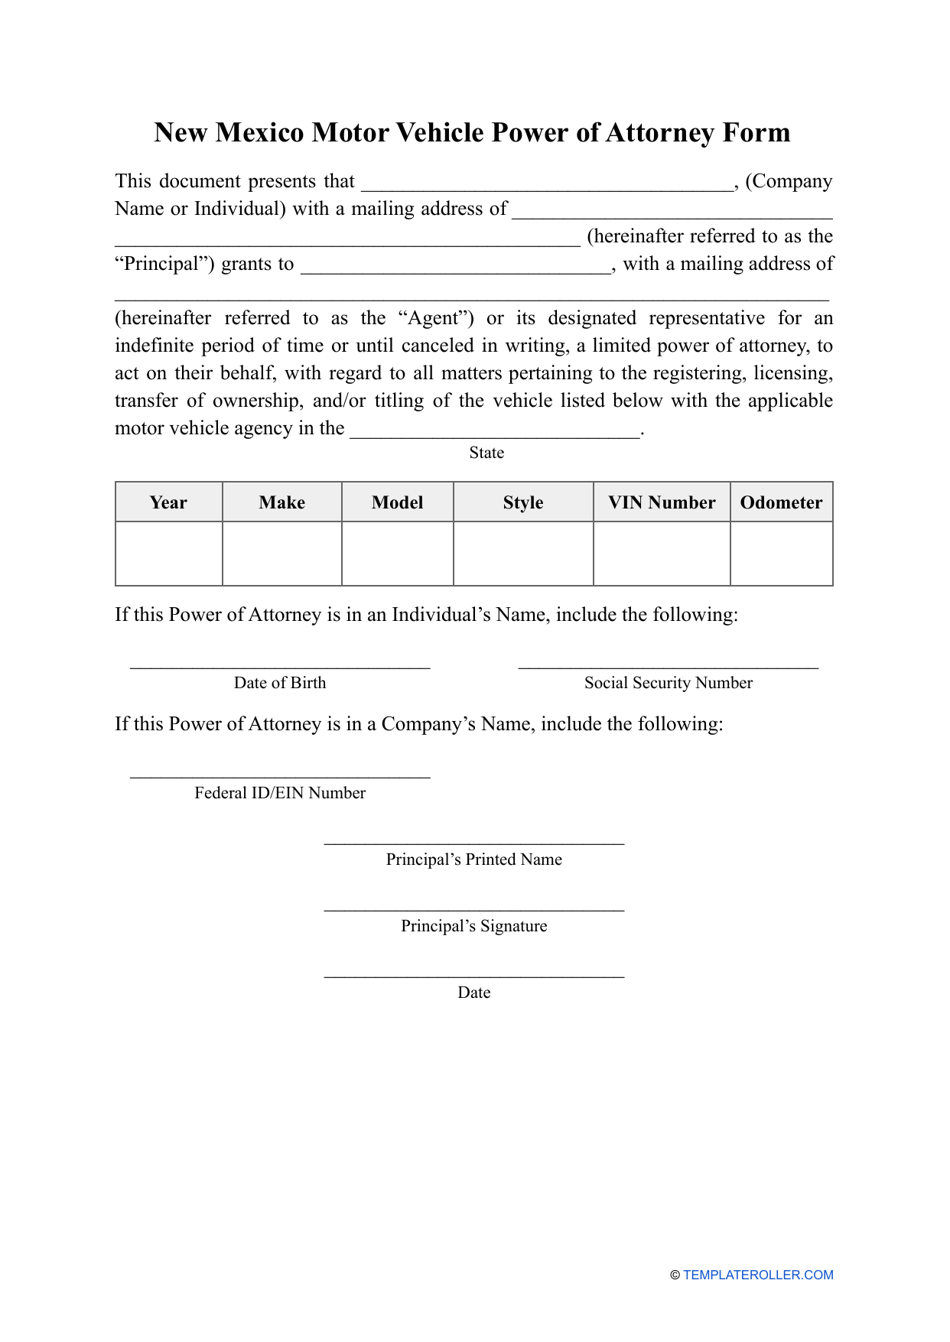 Motor Vehicle Power of Attorney Form - New Mexico, Page 1